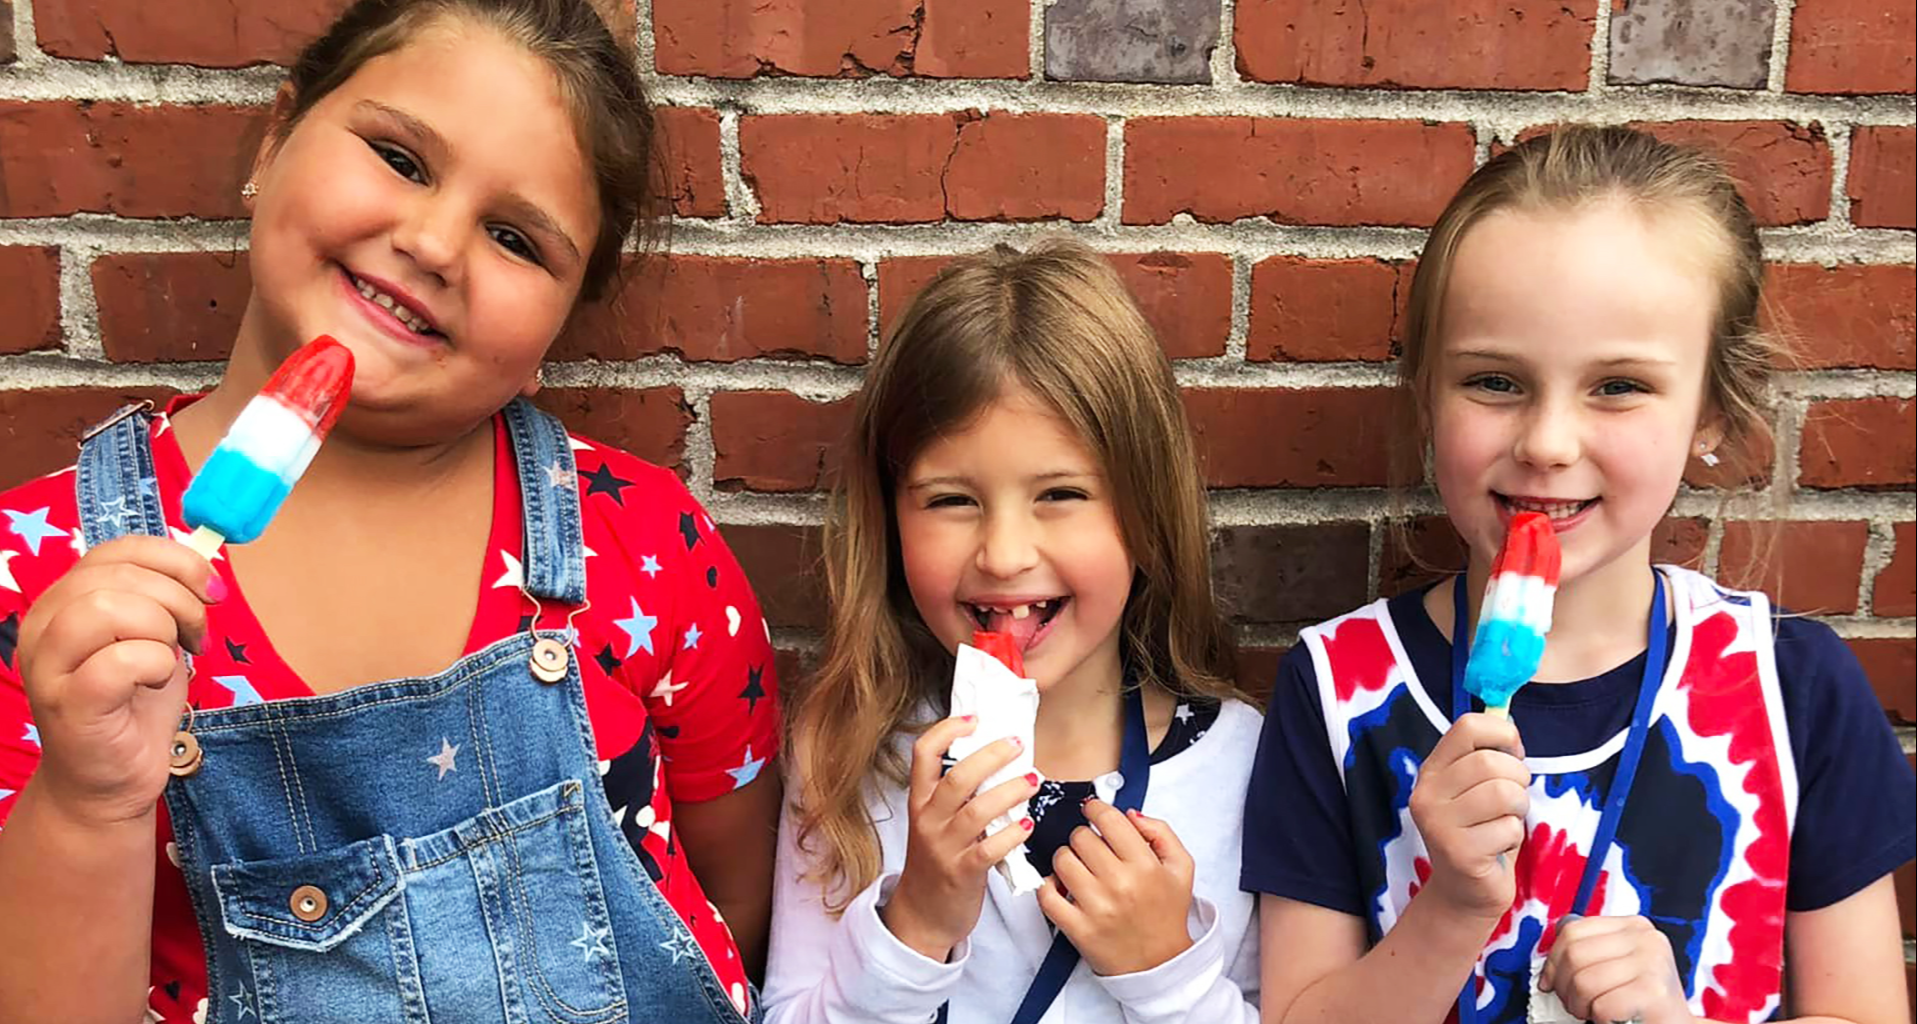 Three students eating a popsicle.